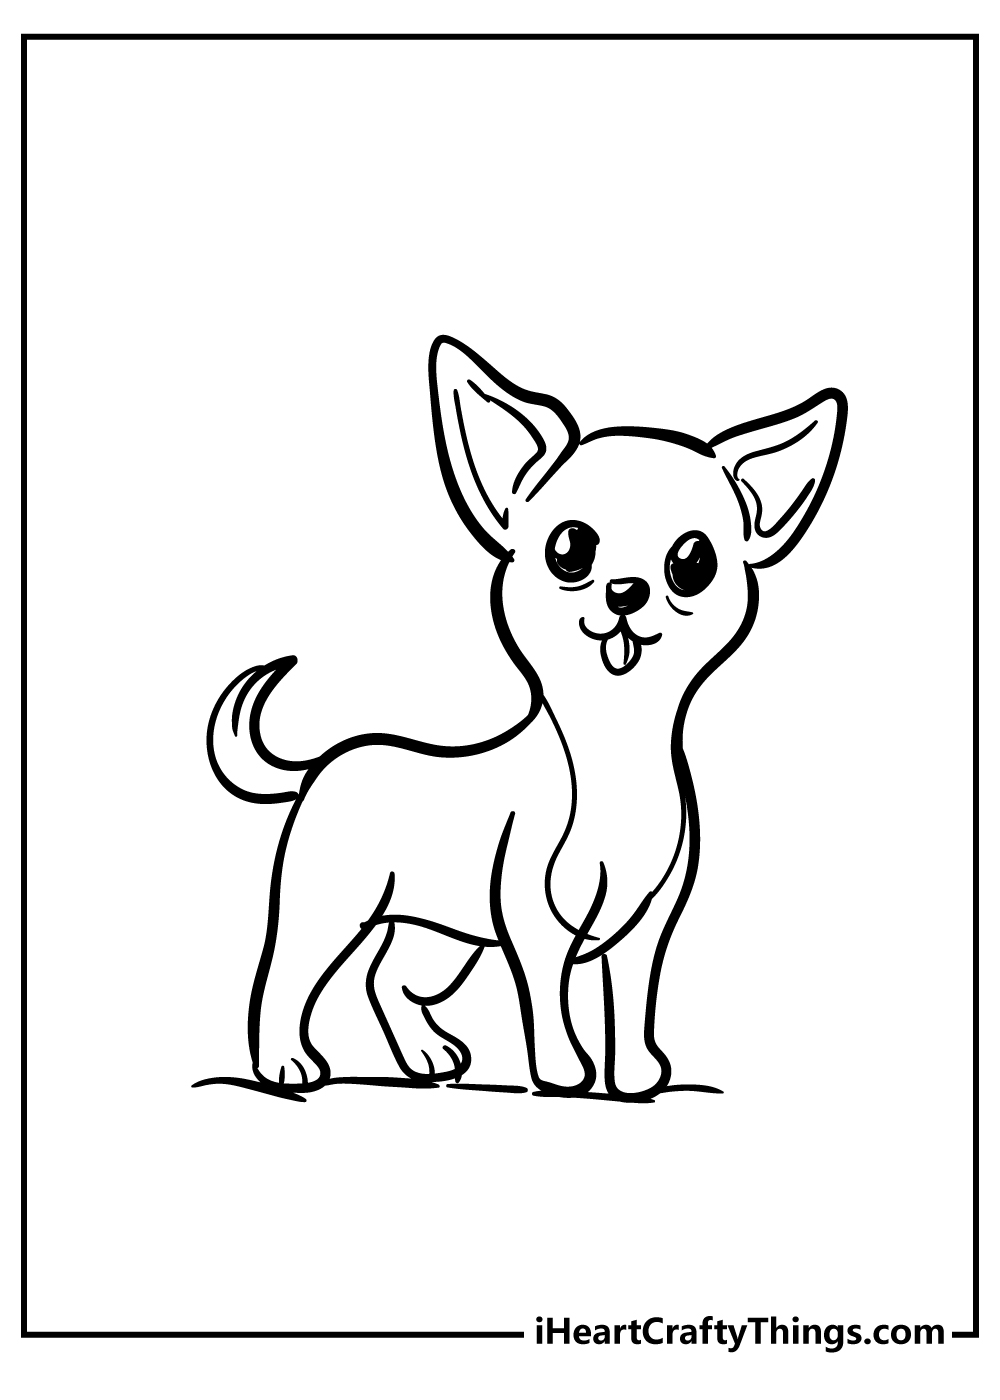 Chihuahua Coloring Pages for preschoolers free printable